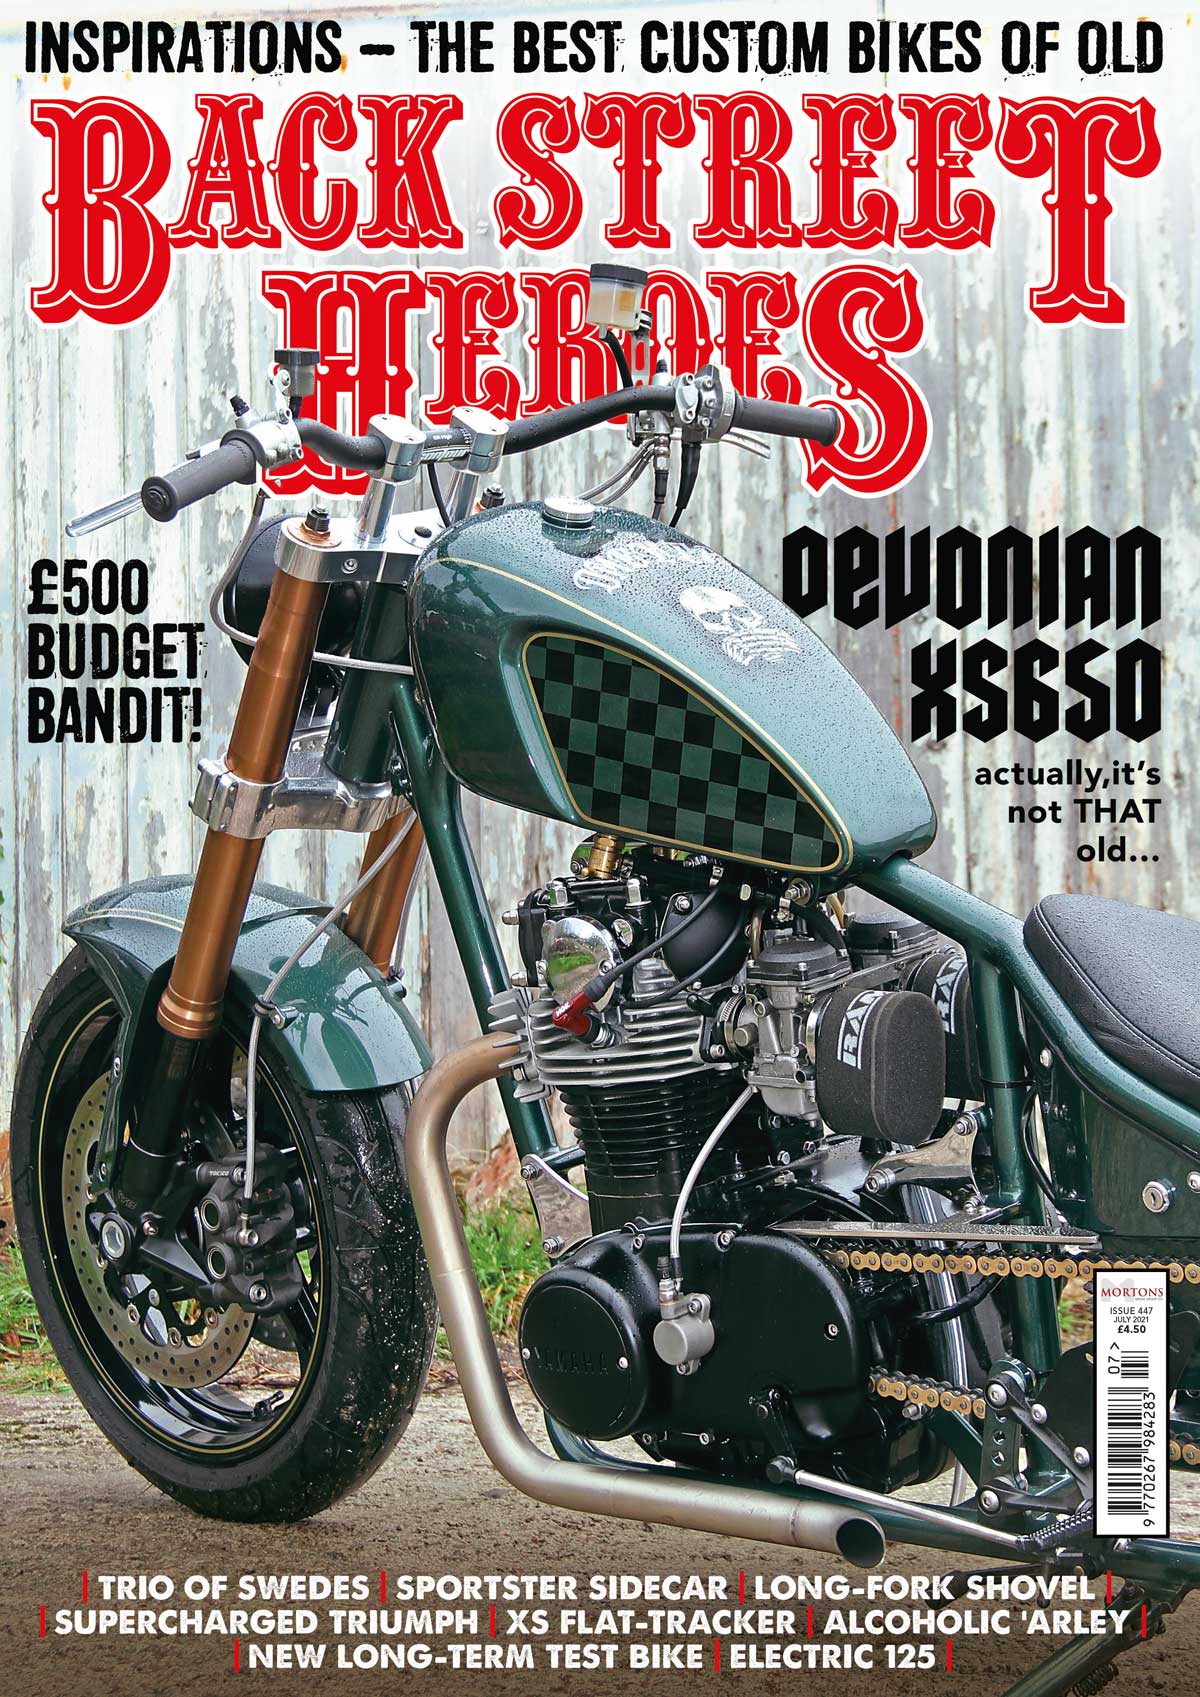 PREVIEW: July issue of Back Street Heroes magazine